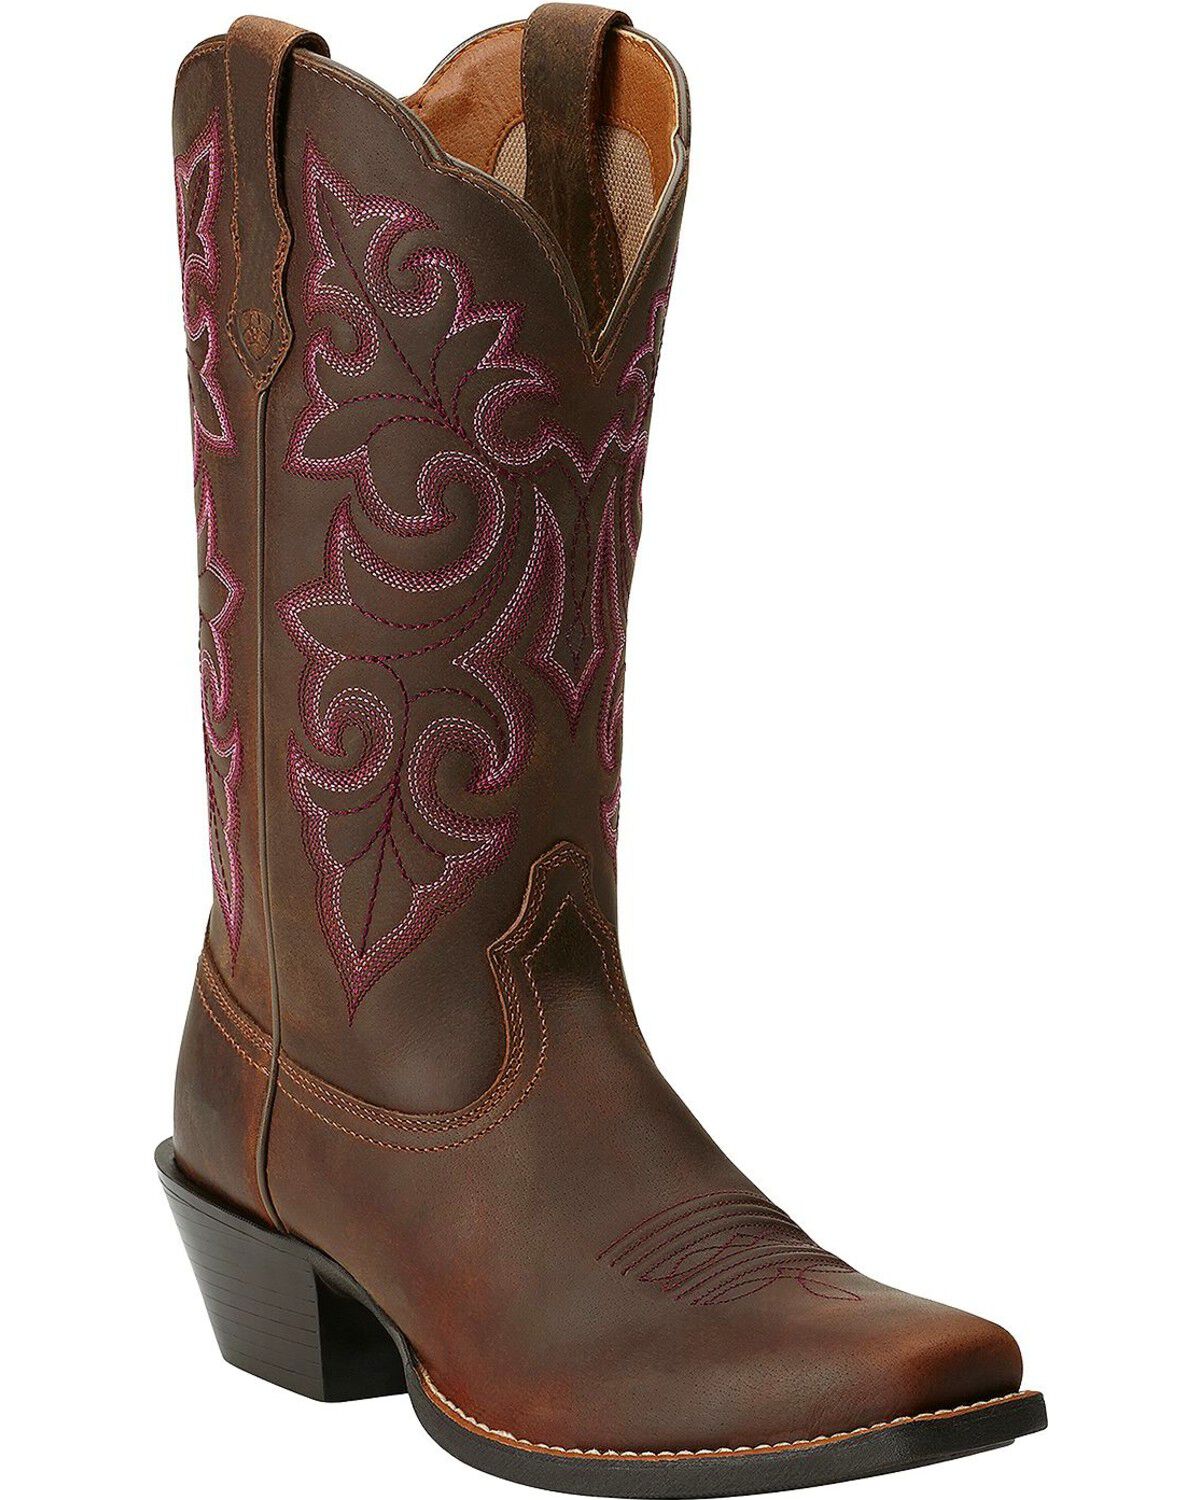 Western Boots - Size 8 1/2 W - Boot Barn